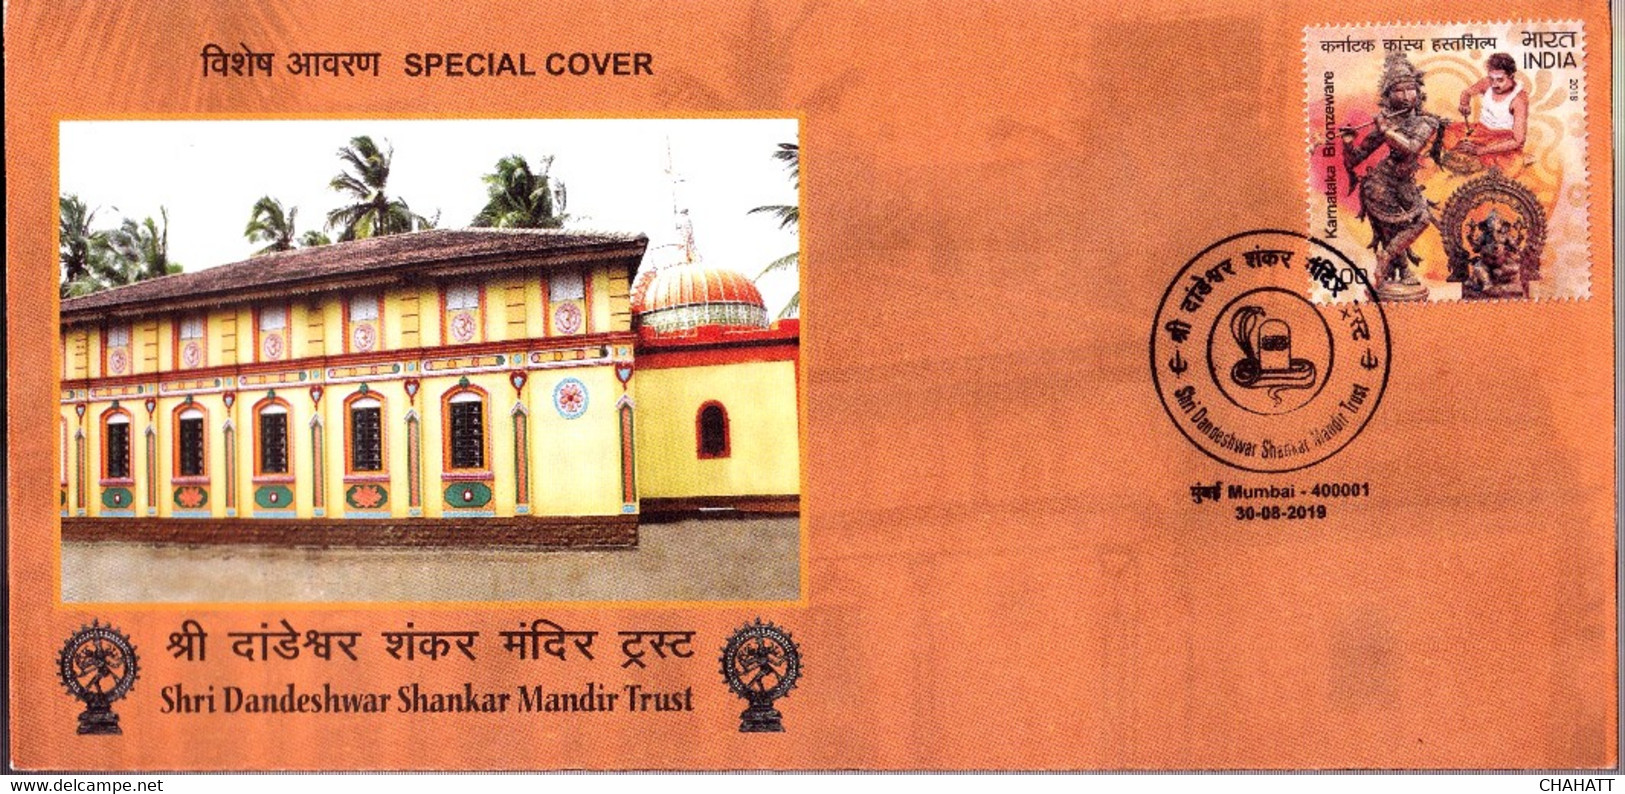 HINDUISM- LORD SHIVA- DANDESHWAR SHANKAR TEMPLE - SPECIAL COVER WITH PICTORIAL CANCELLATION- INDIA-2019-BX3-30 - Hinduism